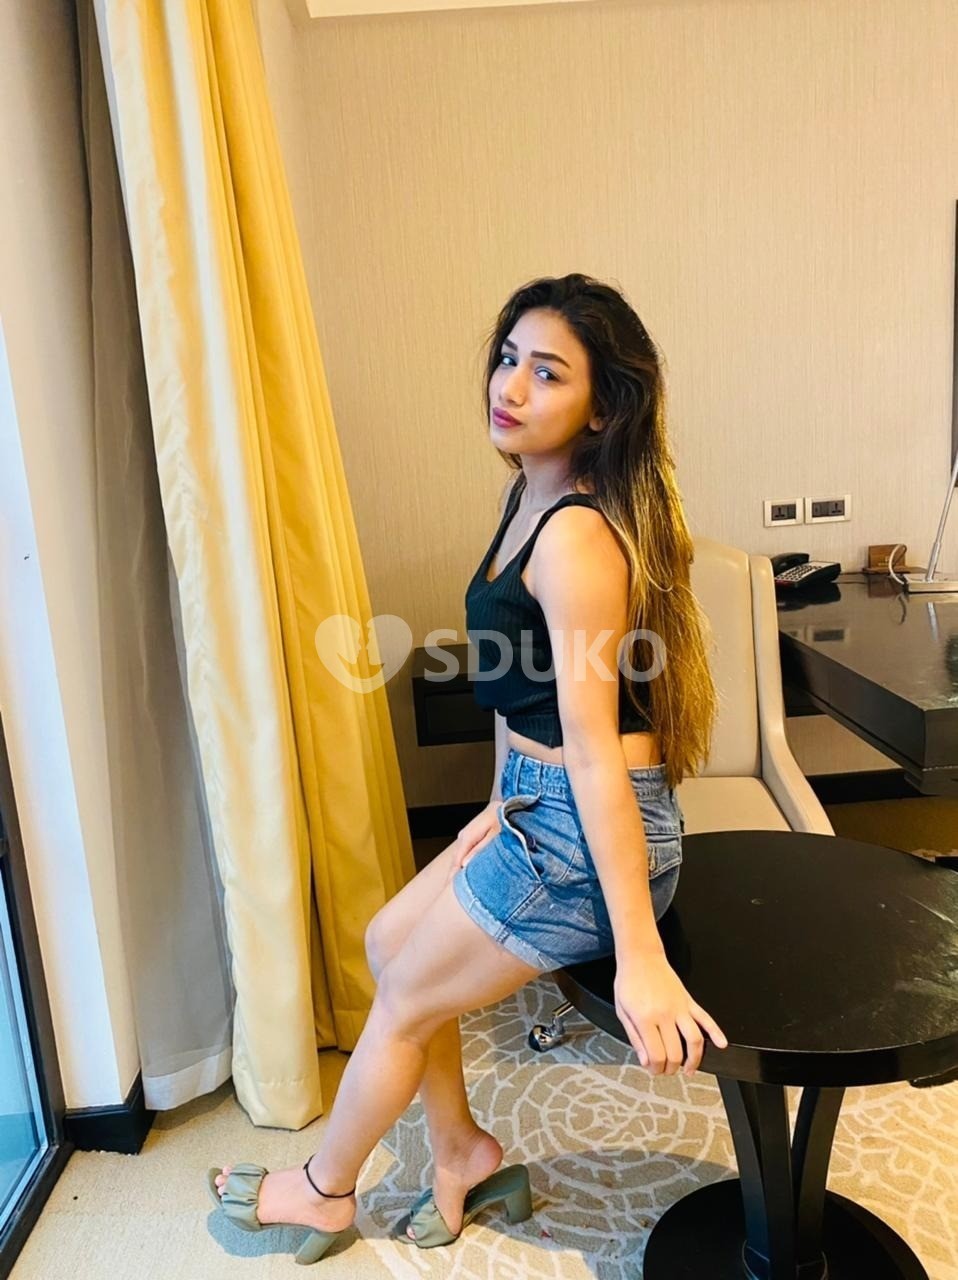 Mangalore Genuine ⭐⭐ service 🔥100% 💫SAFE AND 💋SECURE 💋⭐💫TODAY LOW PRICE UNLIMITED ENJOY HOT COLLEGE